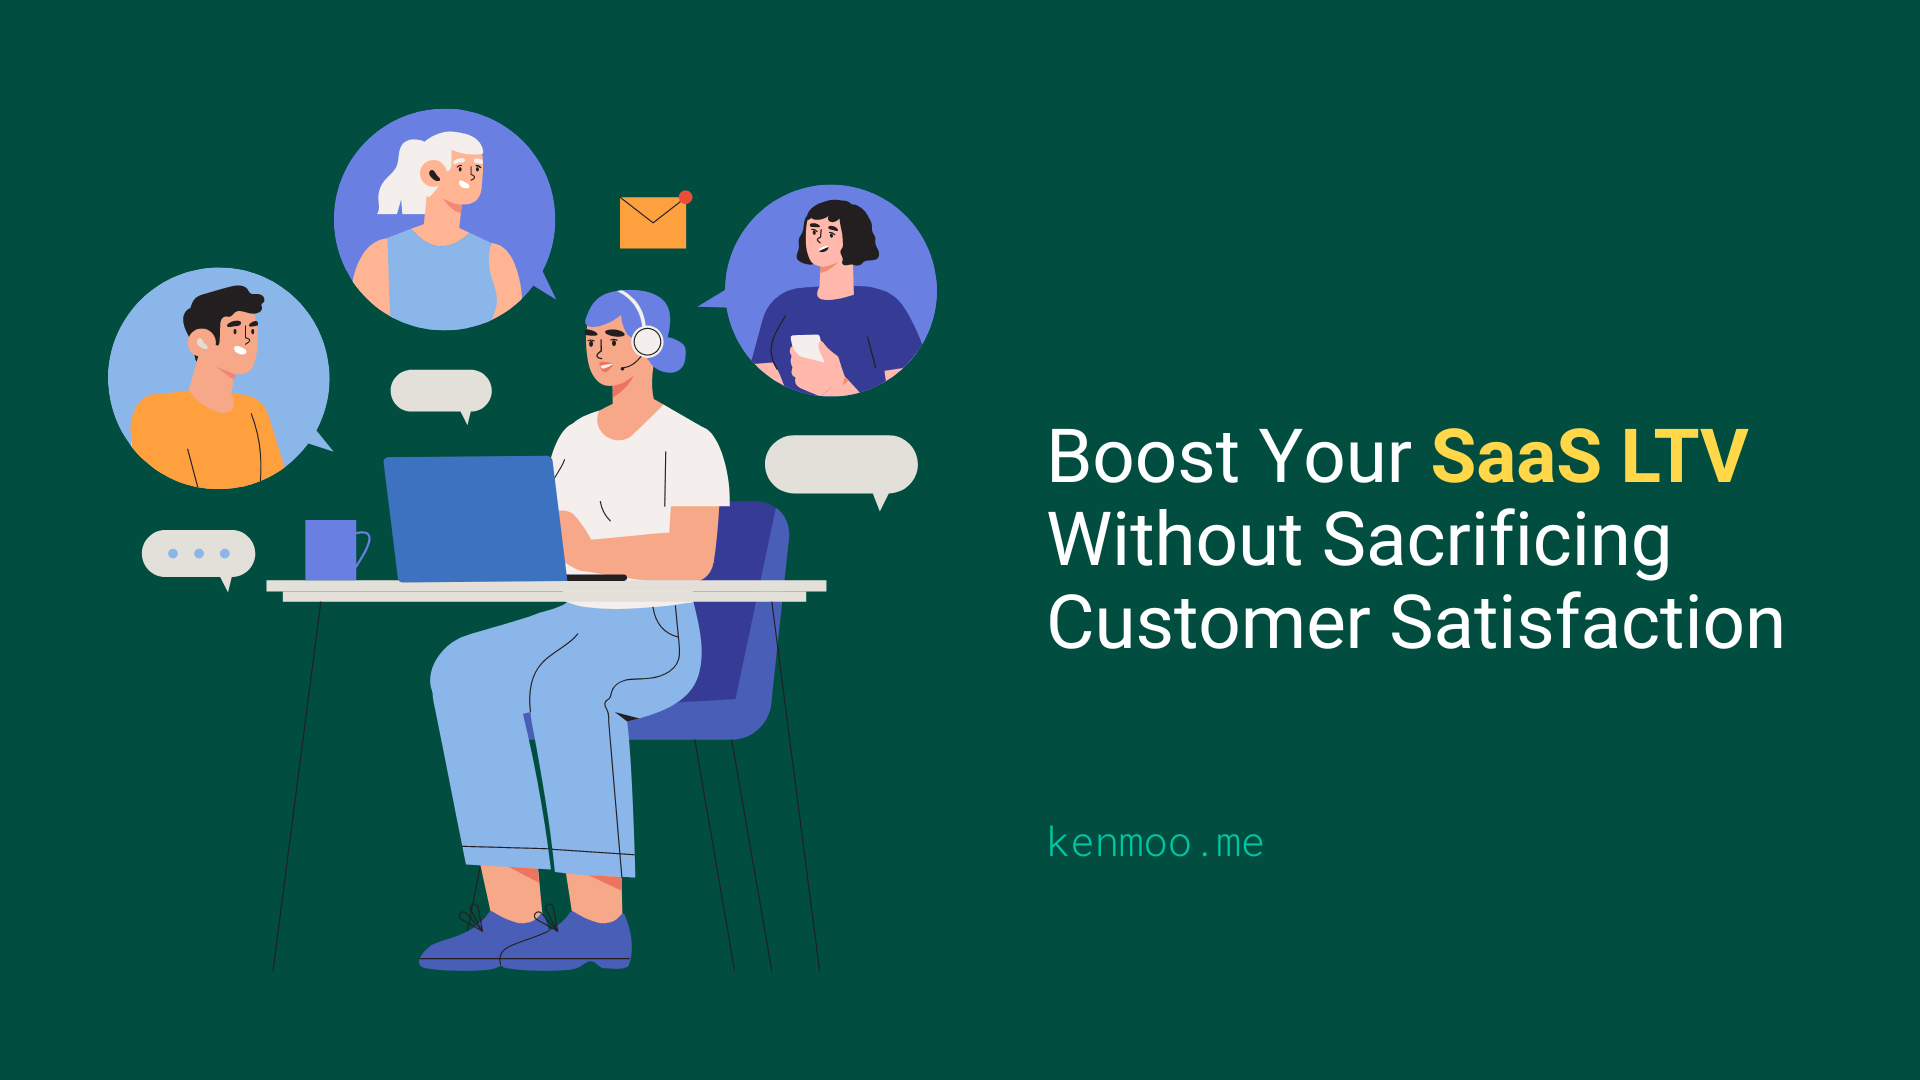 Boost Your SaaS LTV Without Sacrificing Customer Satisfaction